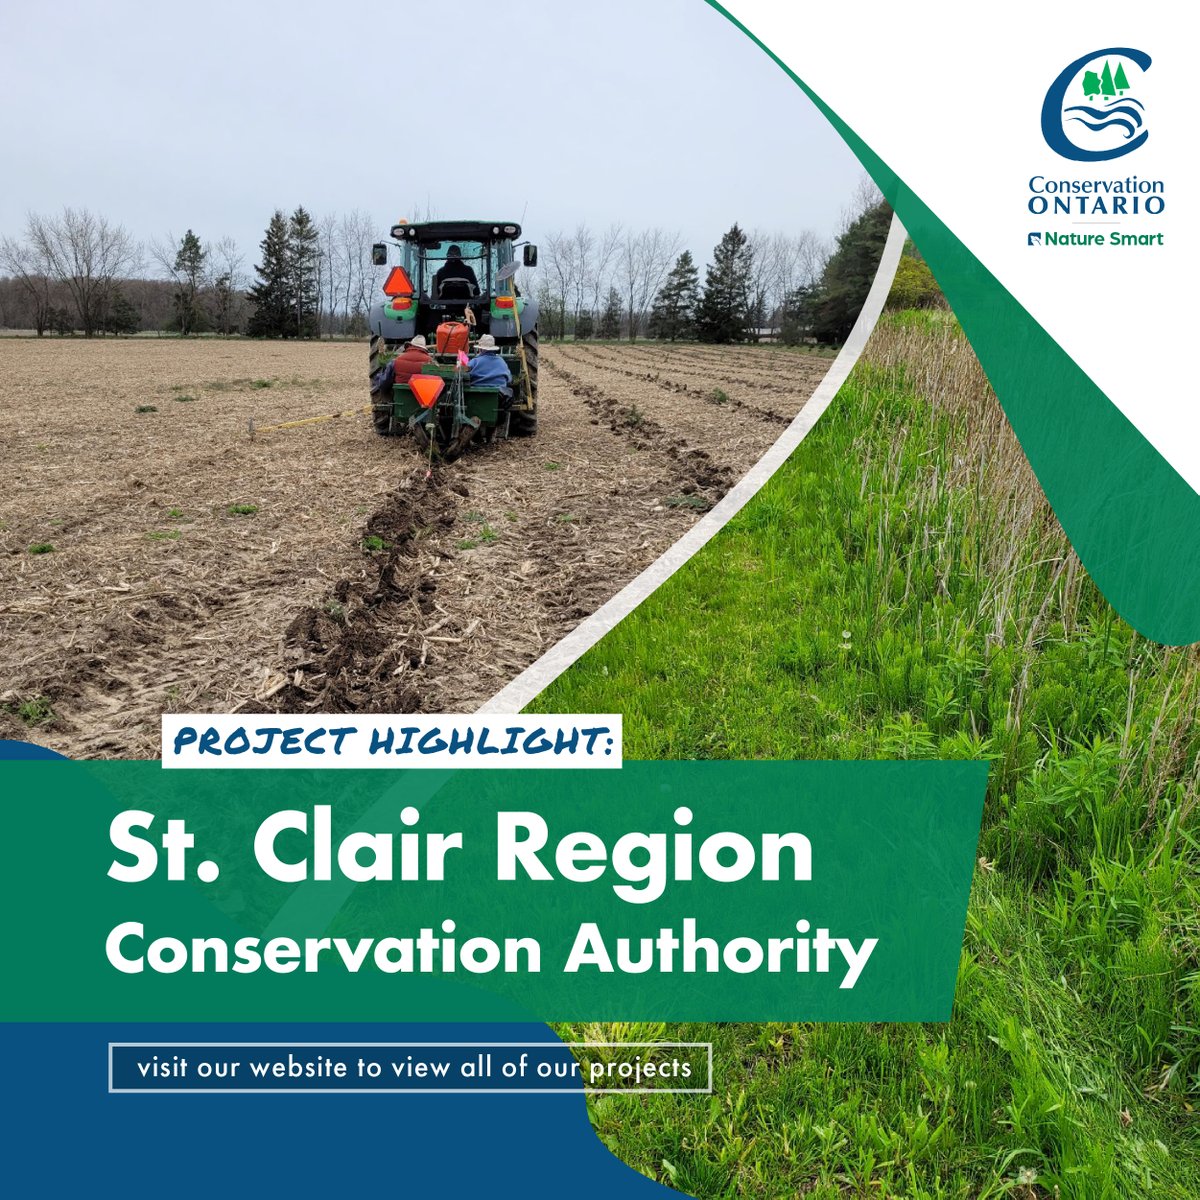 With funding from @environmentca Nature Smart Climate Solutions Fund, @SCRCA_water planted grass buffers in retired cropped riparian areas. Restored grass buffers lower erosion and boost carbon sequestration.
conservationontario.ca/policy-priorit…
#NatureRestores #NaturalChampions